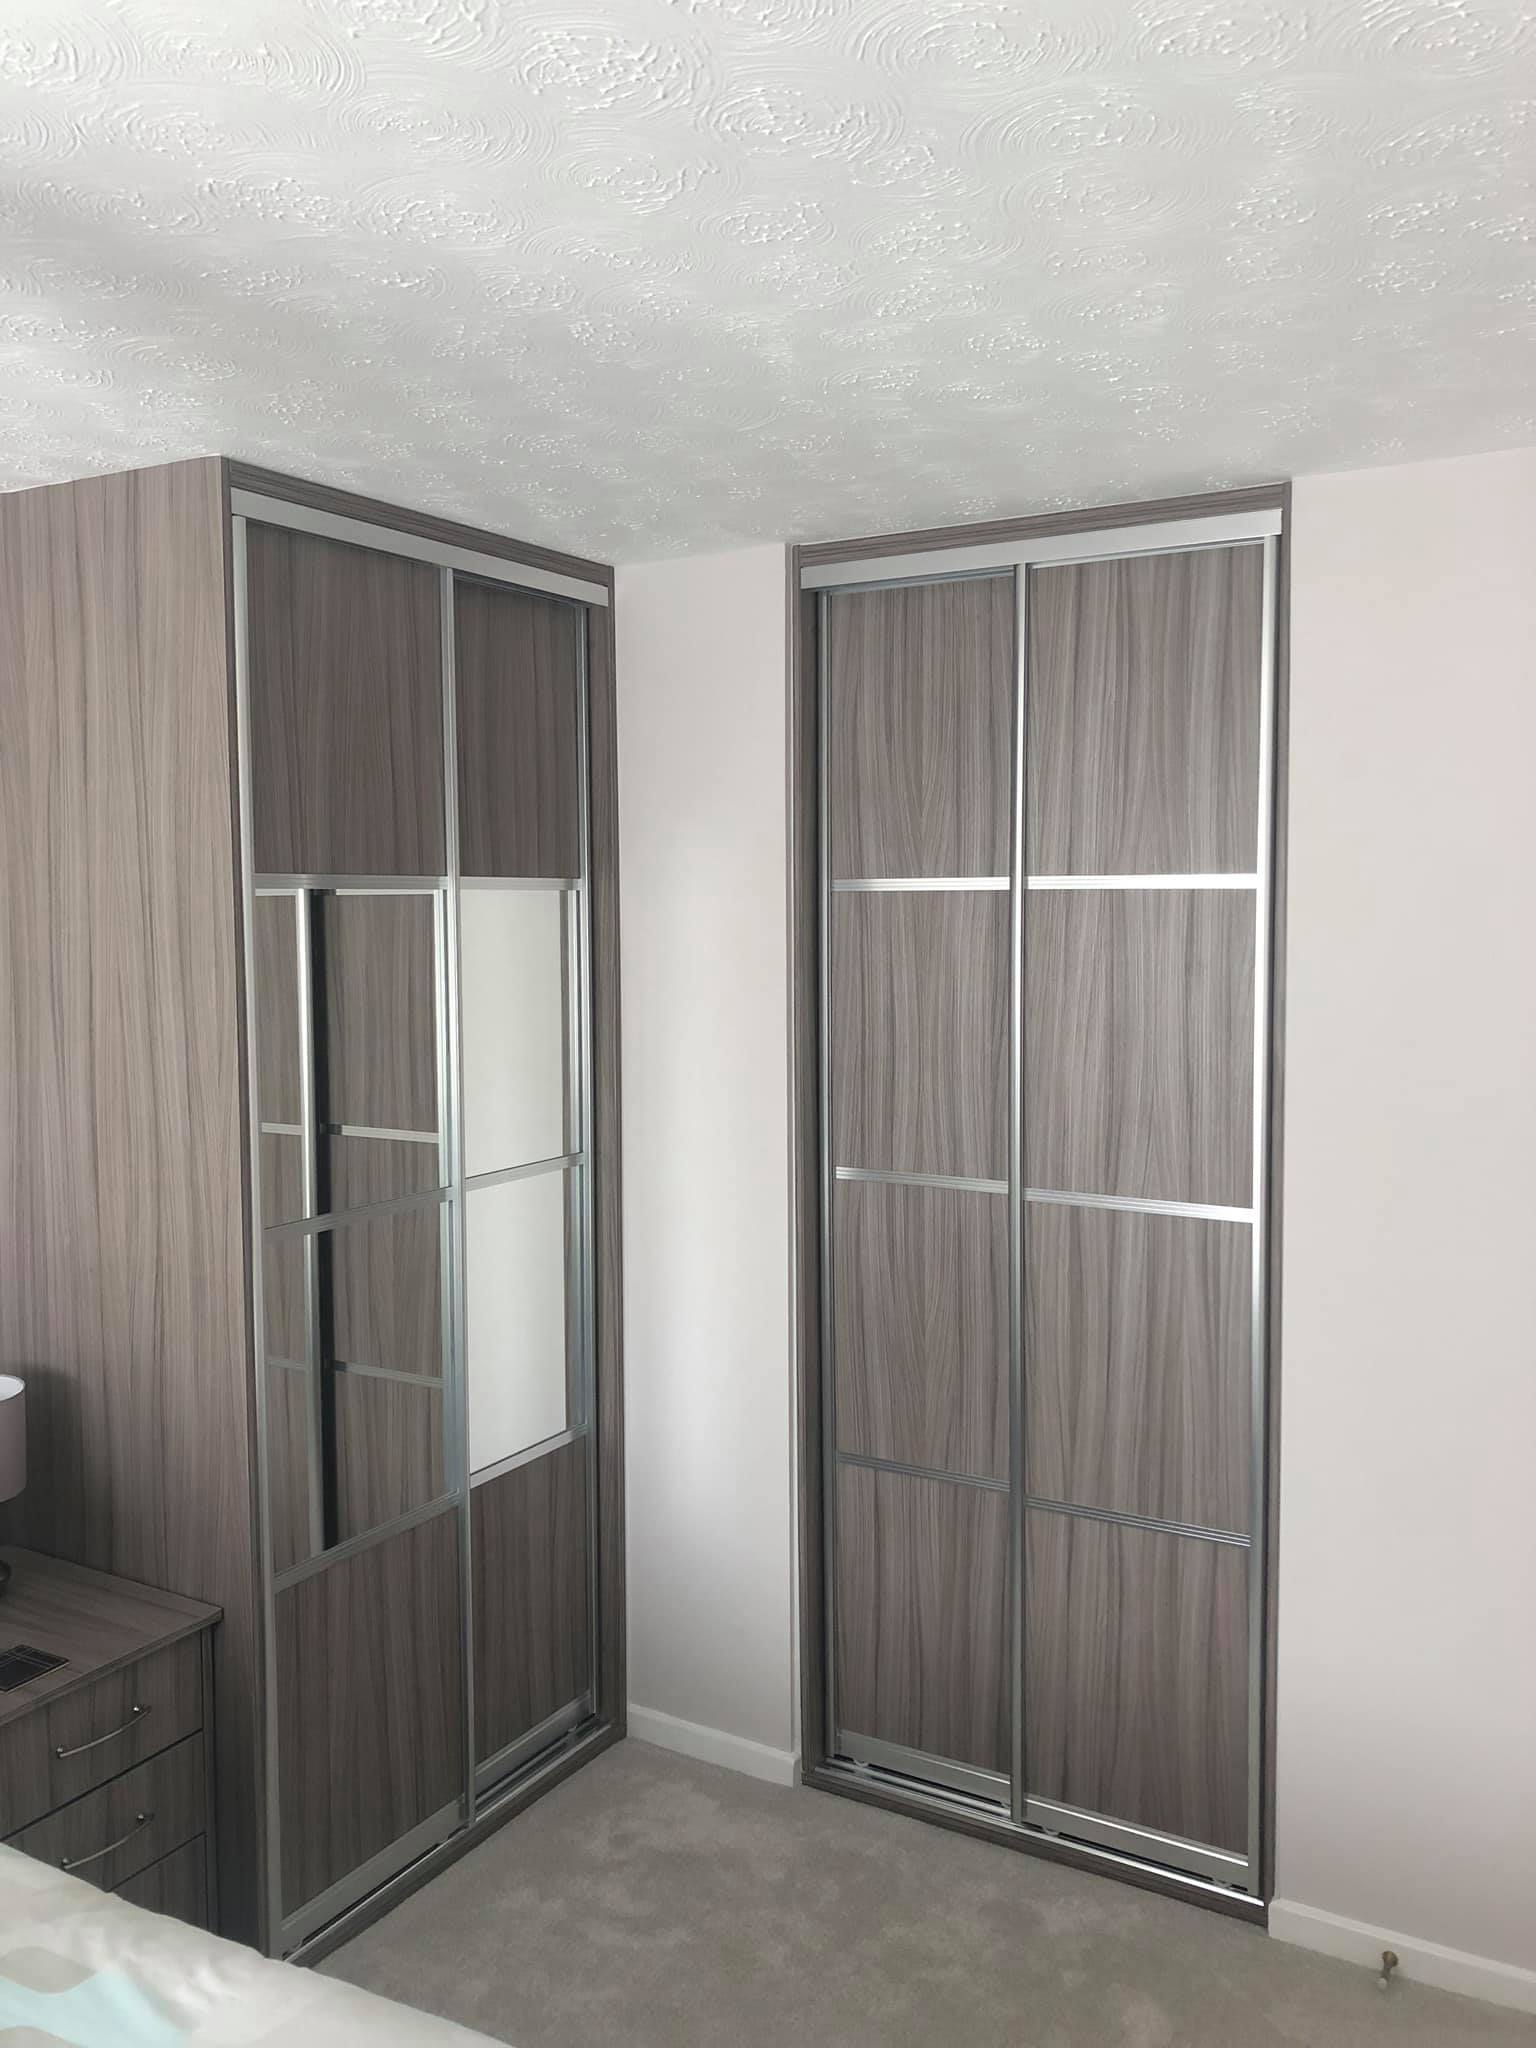 bespoke fitted wardrobes